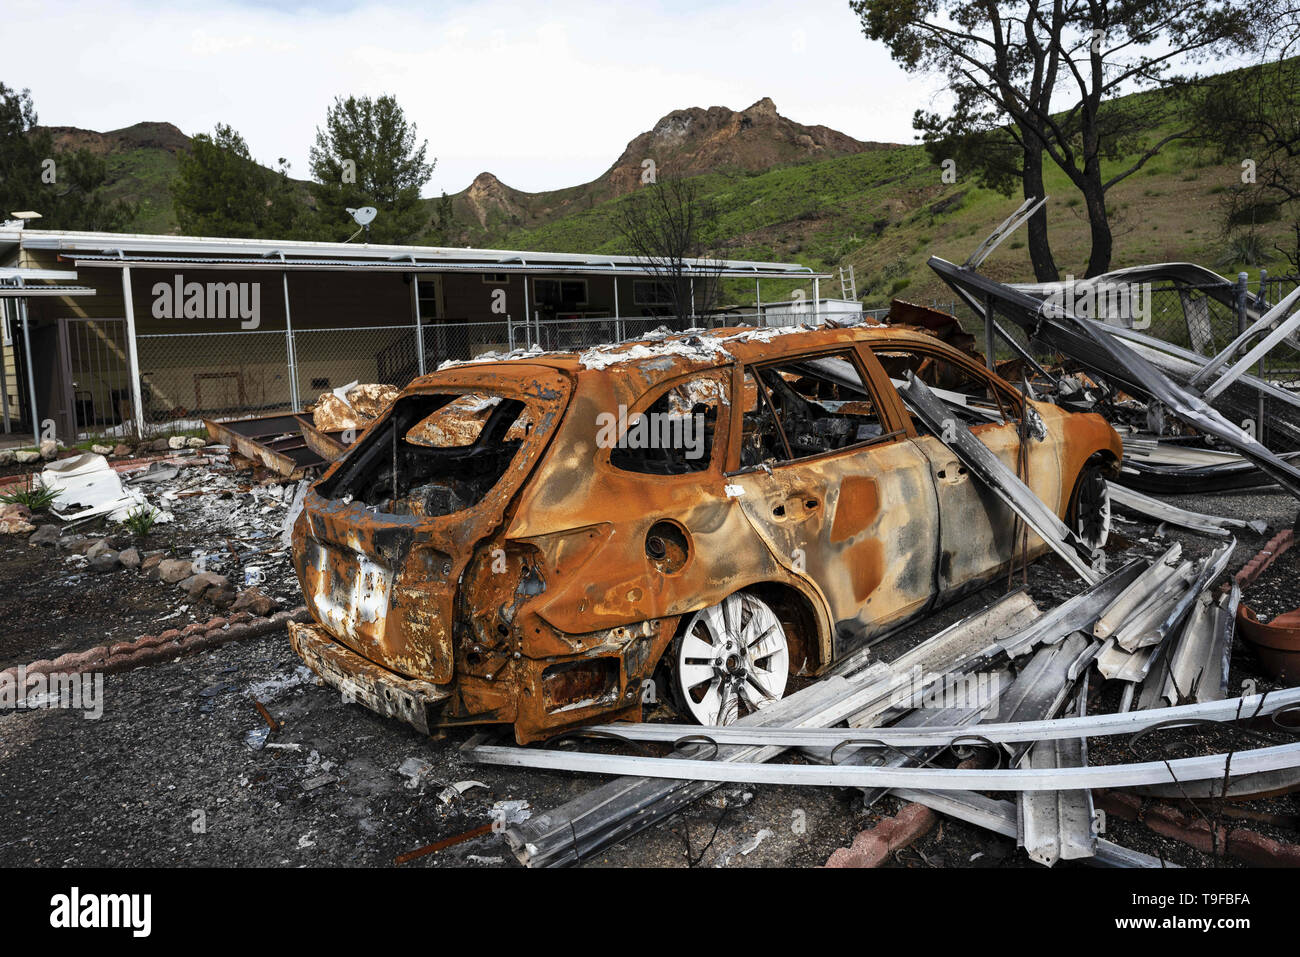 Agoura Hills, CA, USA. 11th Mar, 2019. A burned car is seen in the aftermath of the deadly Woolsey wid fire in Agoura Hills, California.Thousands of fire fighters battled the 2018 Woolsey brush fire in southern California as tens of thousands of people were under mandatory evacuation. 1500 destroyed - 341 damaged, structures were destroyed and damaged, 3 fire fighters were injured and 3 civilian fatalities encountered. The cause of the fire is still uncertain. Credit: Ronen Tivony/SOPA Images/ZUMA Wire/Alamy Live News Stock Photo